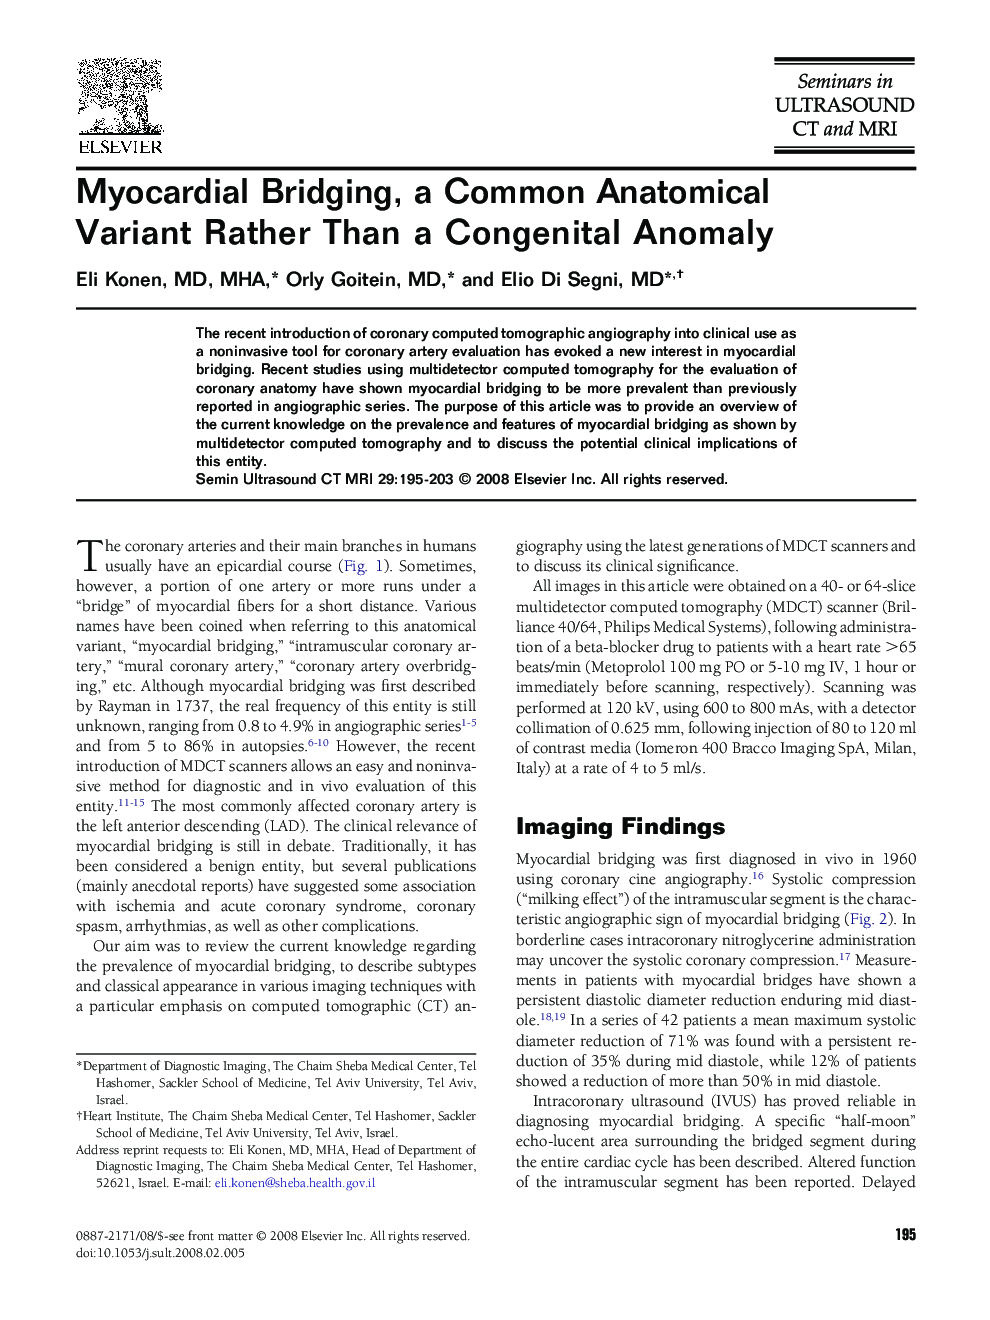 Myocardial Bridging, a Common Anatomical Variant Rather Than a Congenital Anomaly